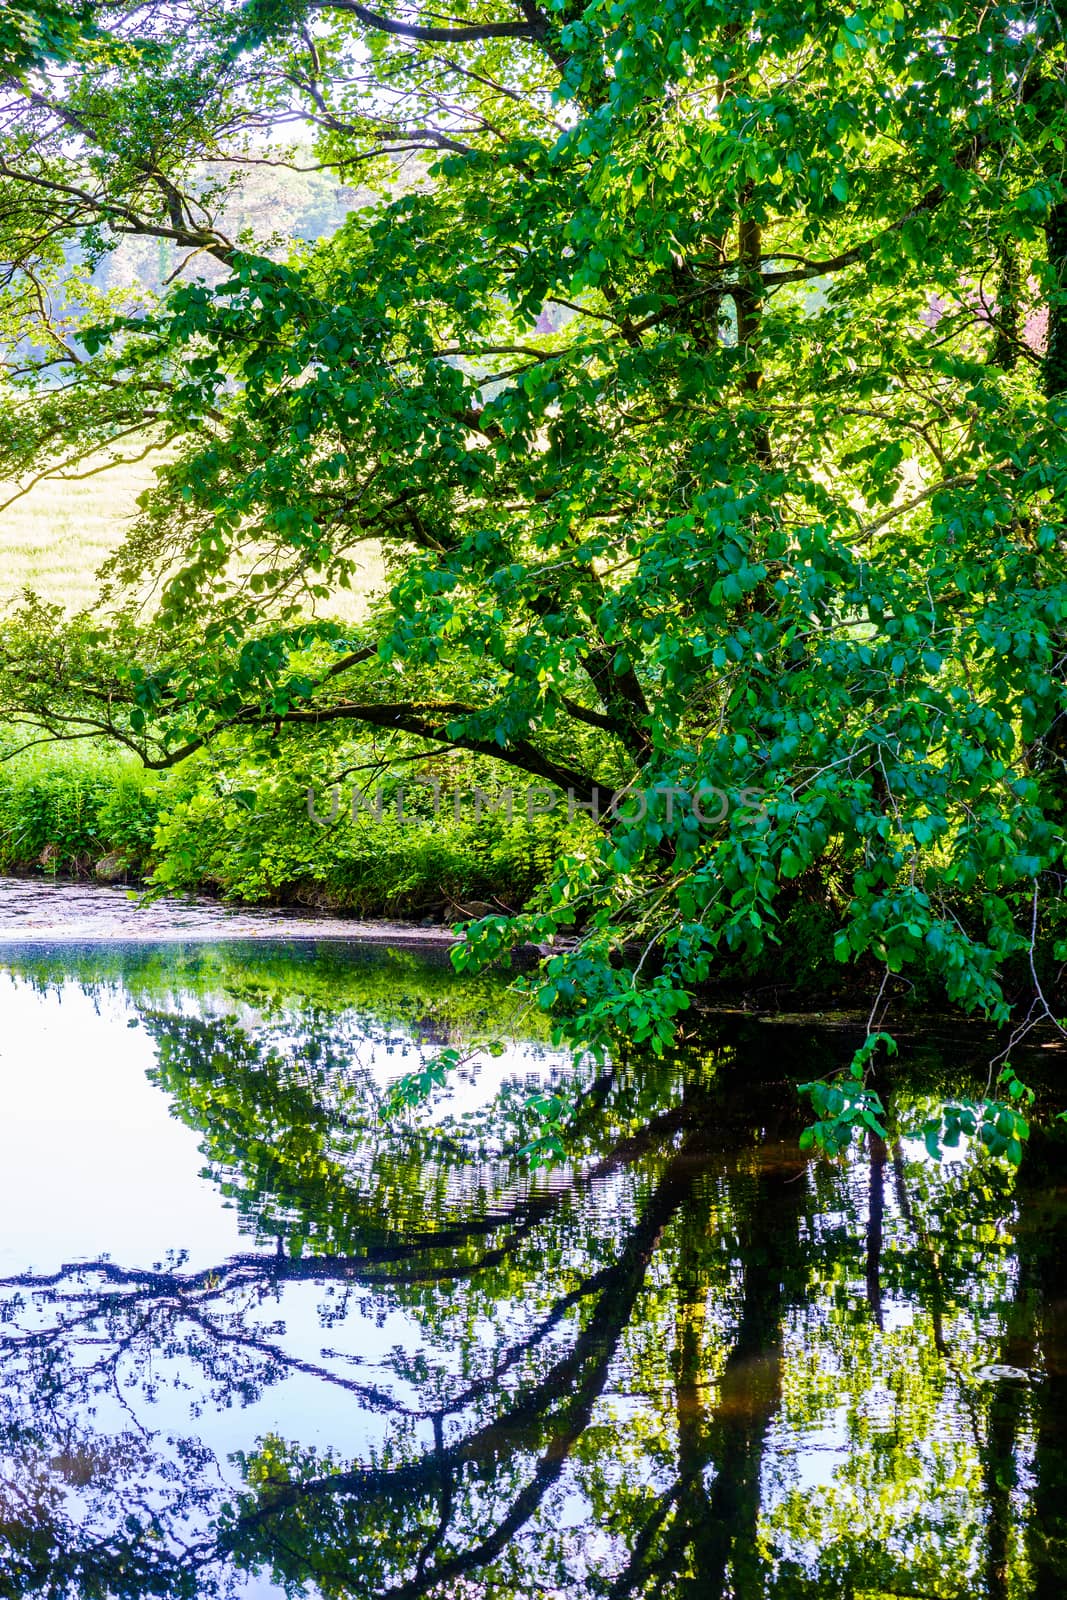 Sunny summer scene with small river and green trees. by paddythegolfer